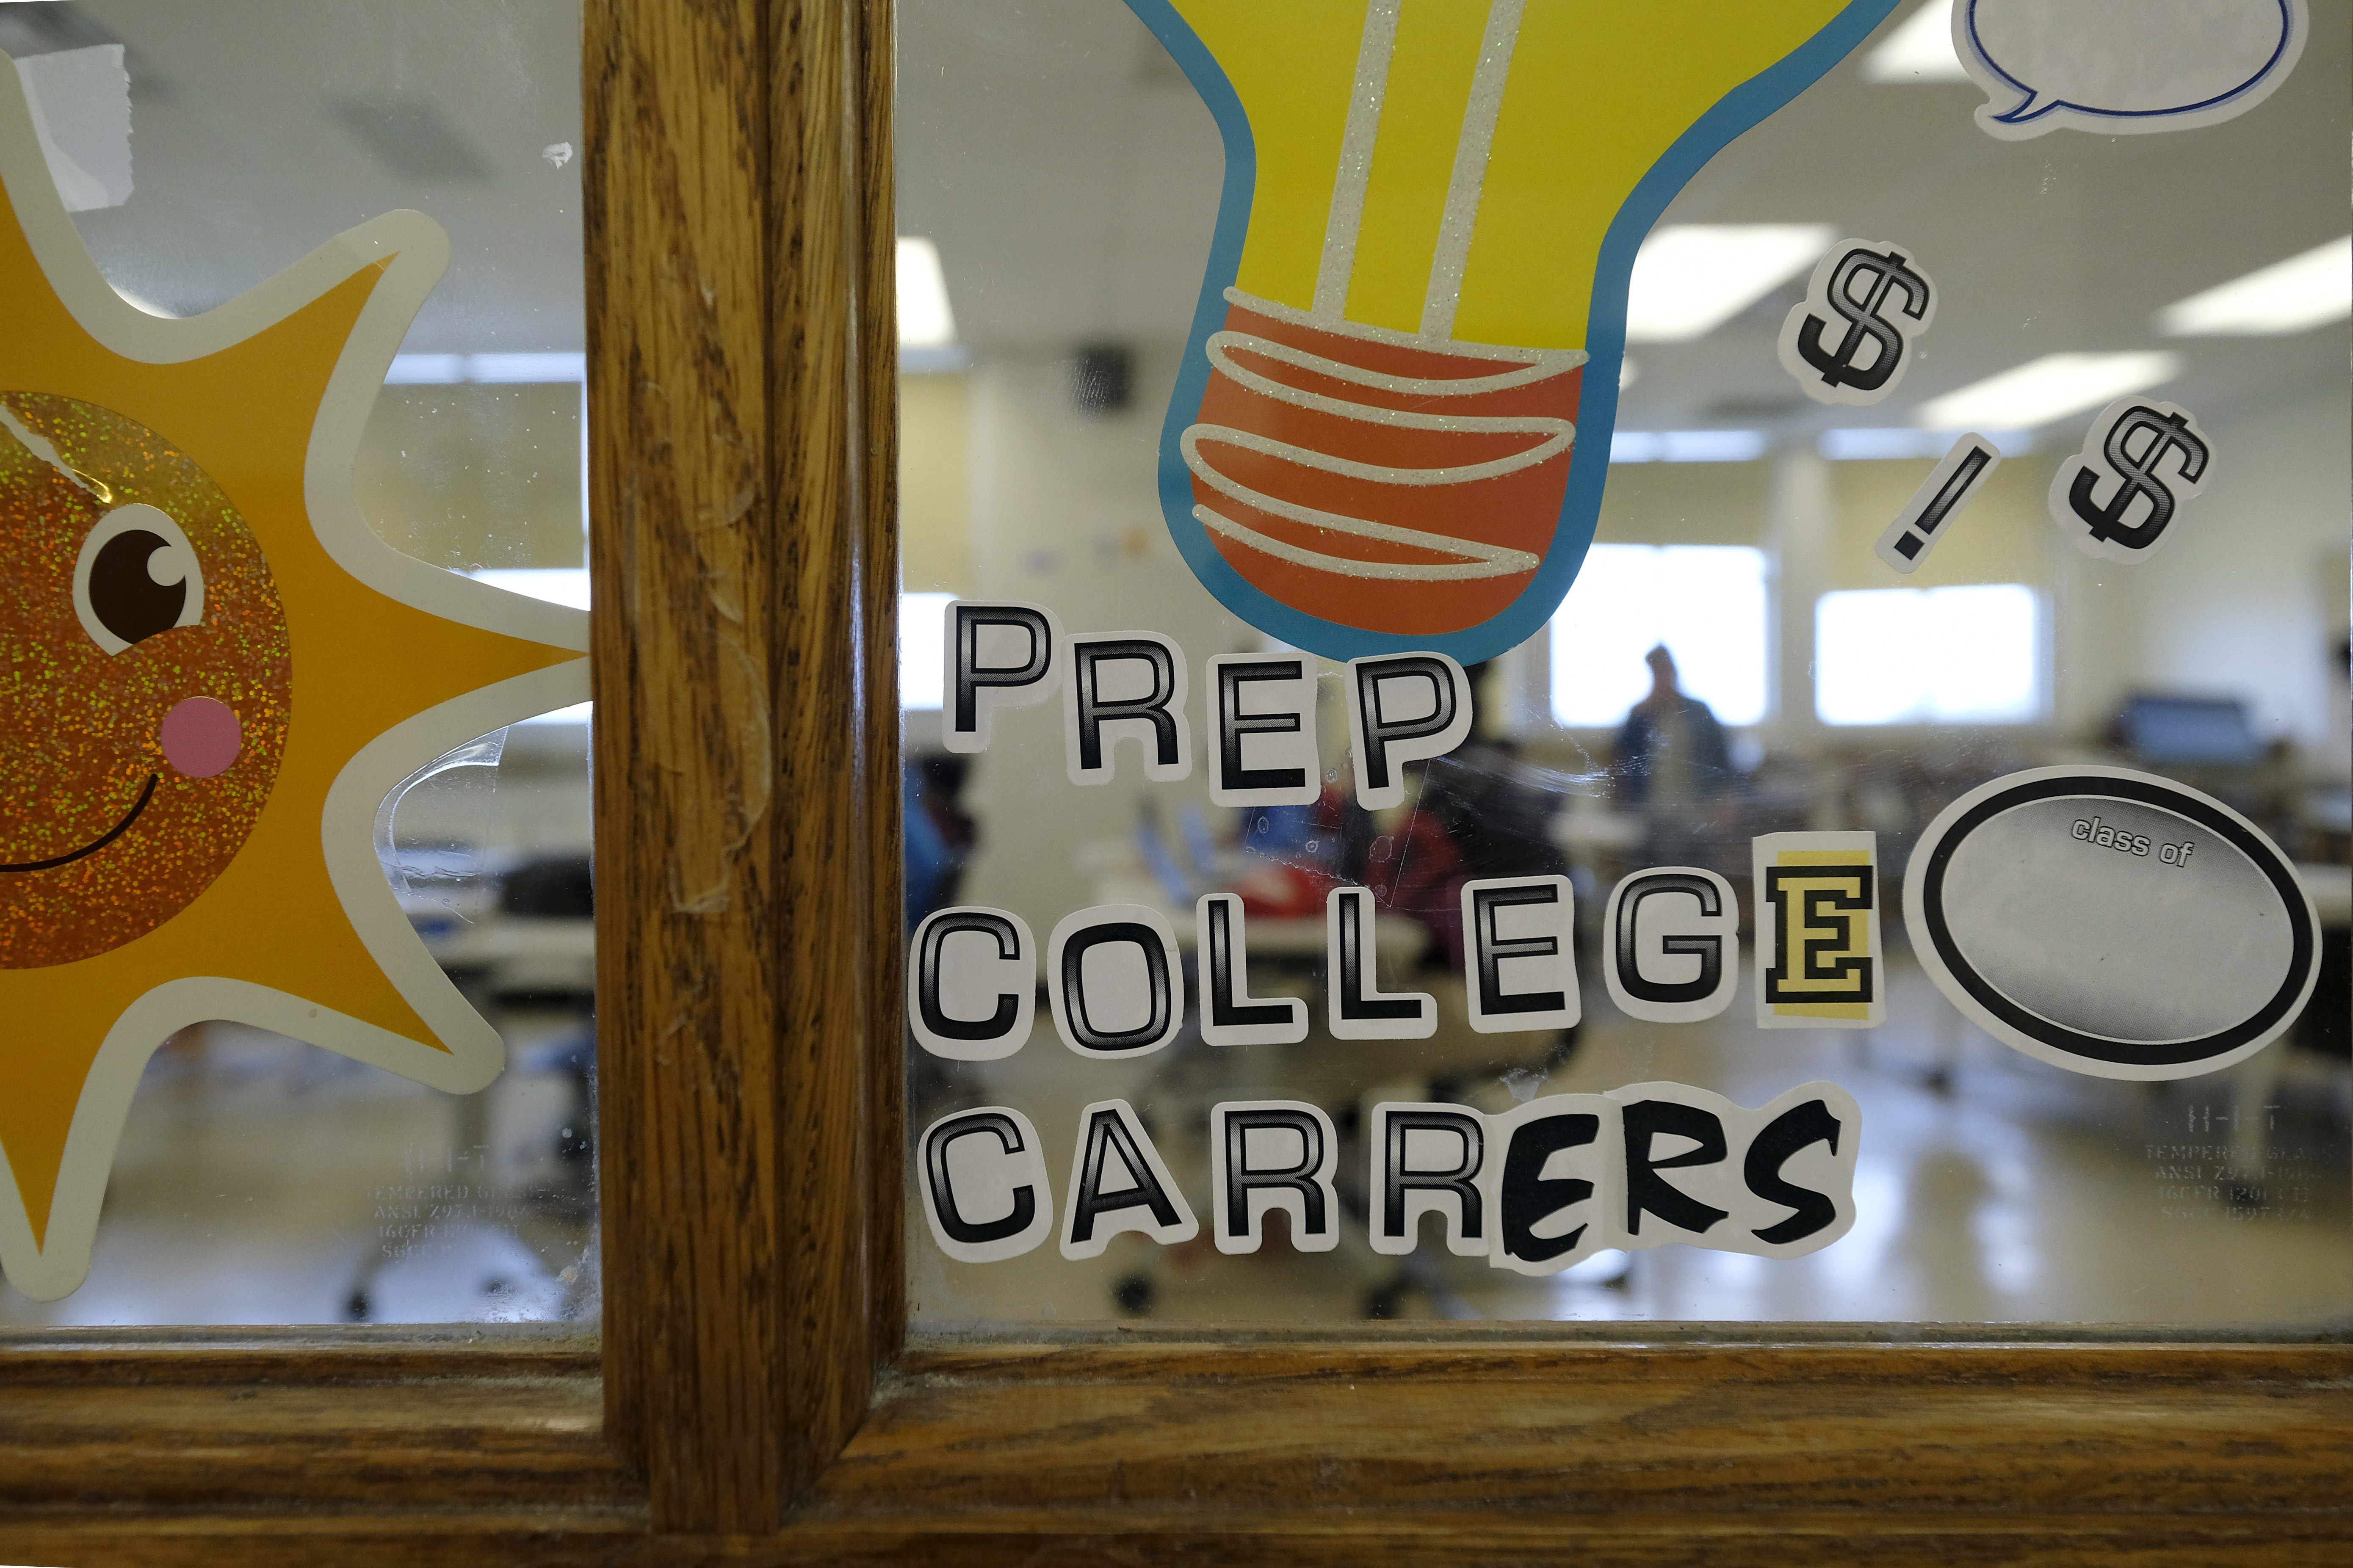 A “Prep College Careers” sign on a window at Crispus Attucks High School, a public school in Indianapolis, Indiana. — April 2019 — Photo by Alan Petersime/Chalkbeat